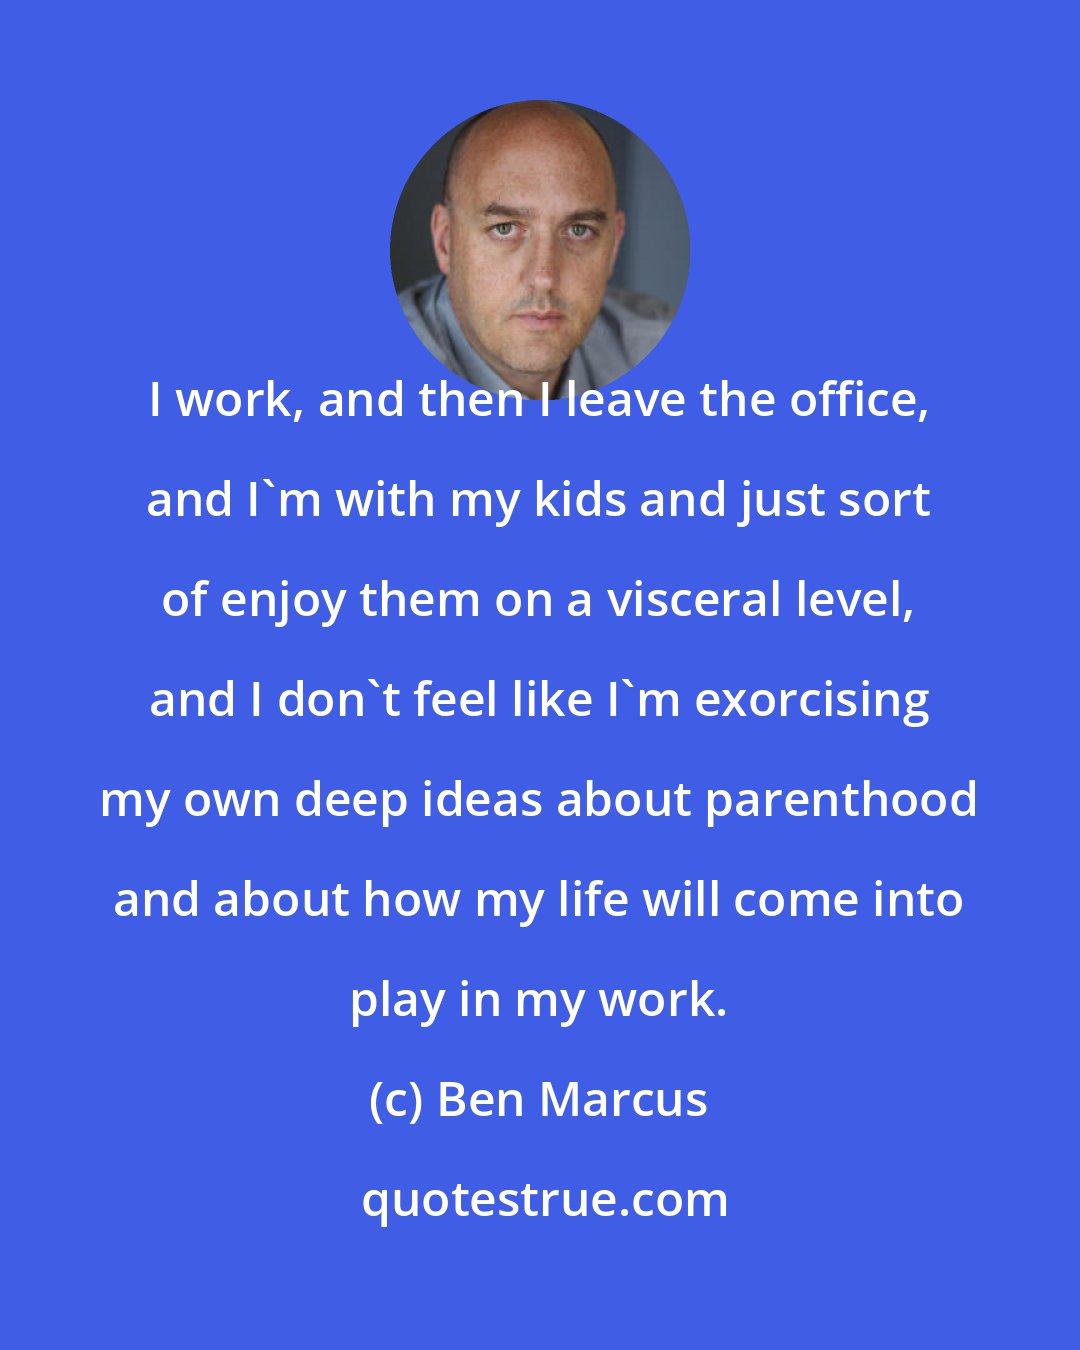 Ben Marcus: I work, and then I leave the office, and I'm with my kids and just sort of enjoy them on a visceral level, and I don't feel like I'm exorcising my own deep ideas about parenthood and about how my life will come into play in my work.